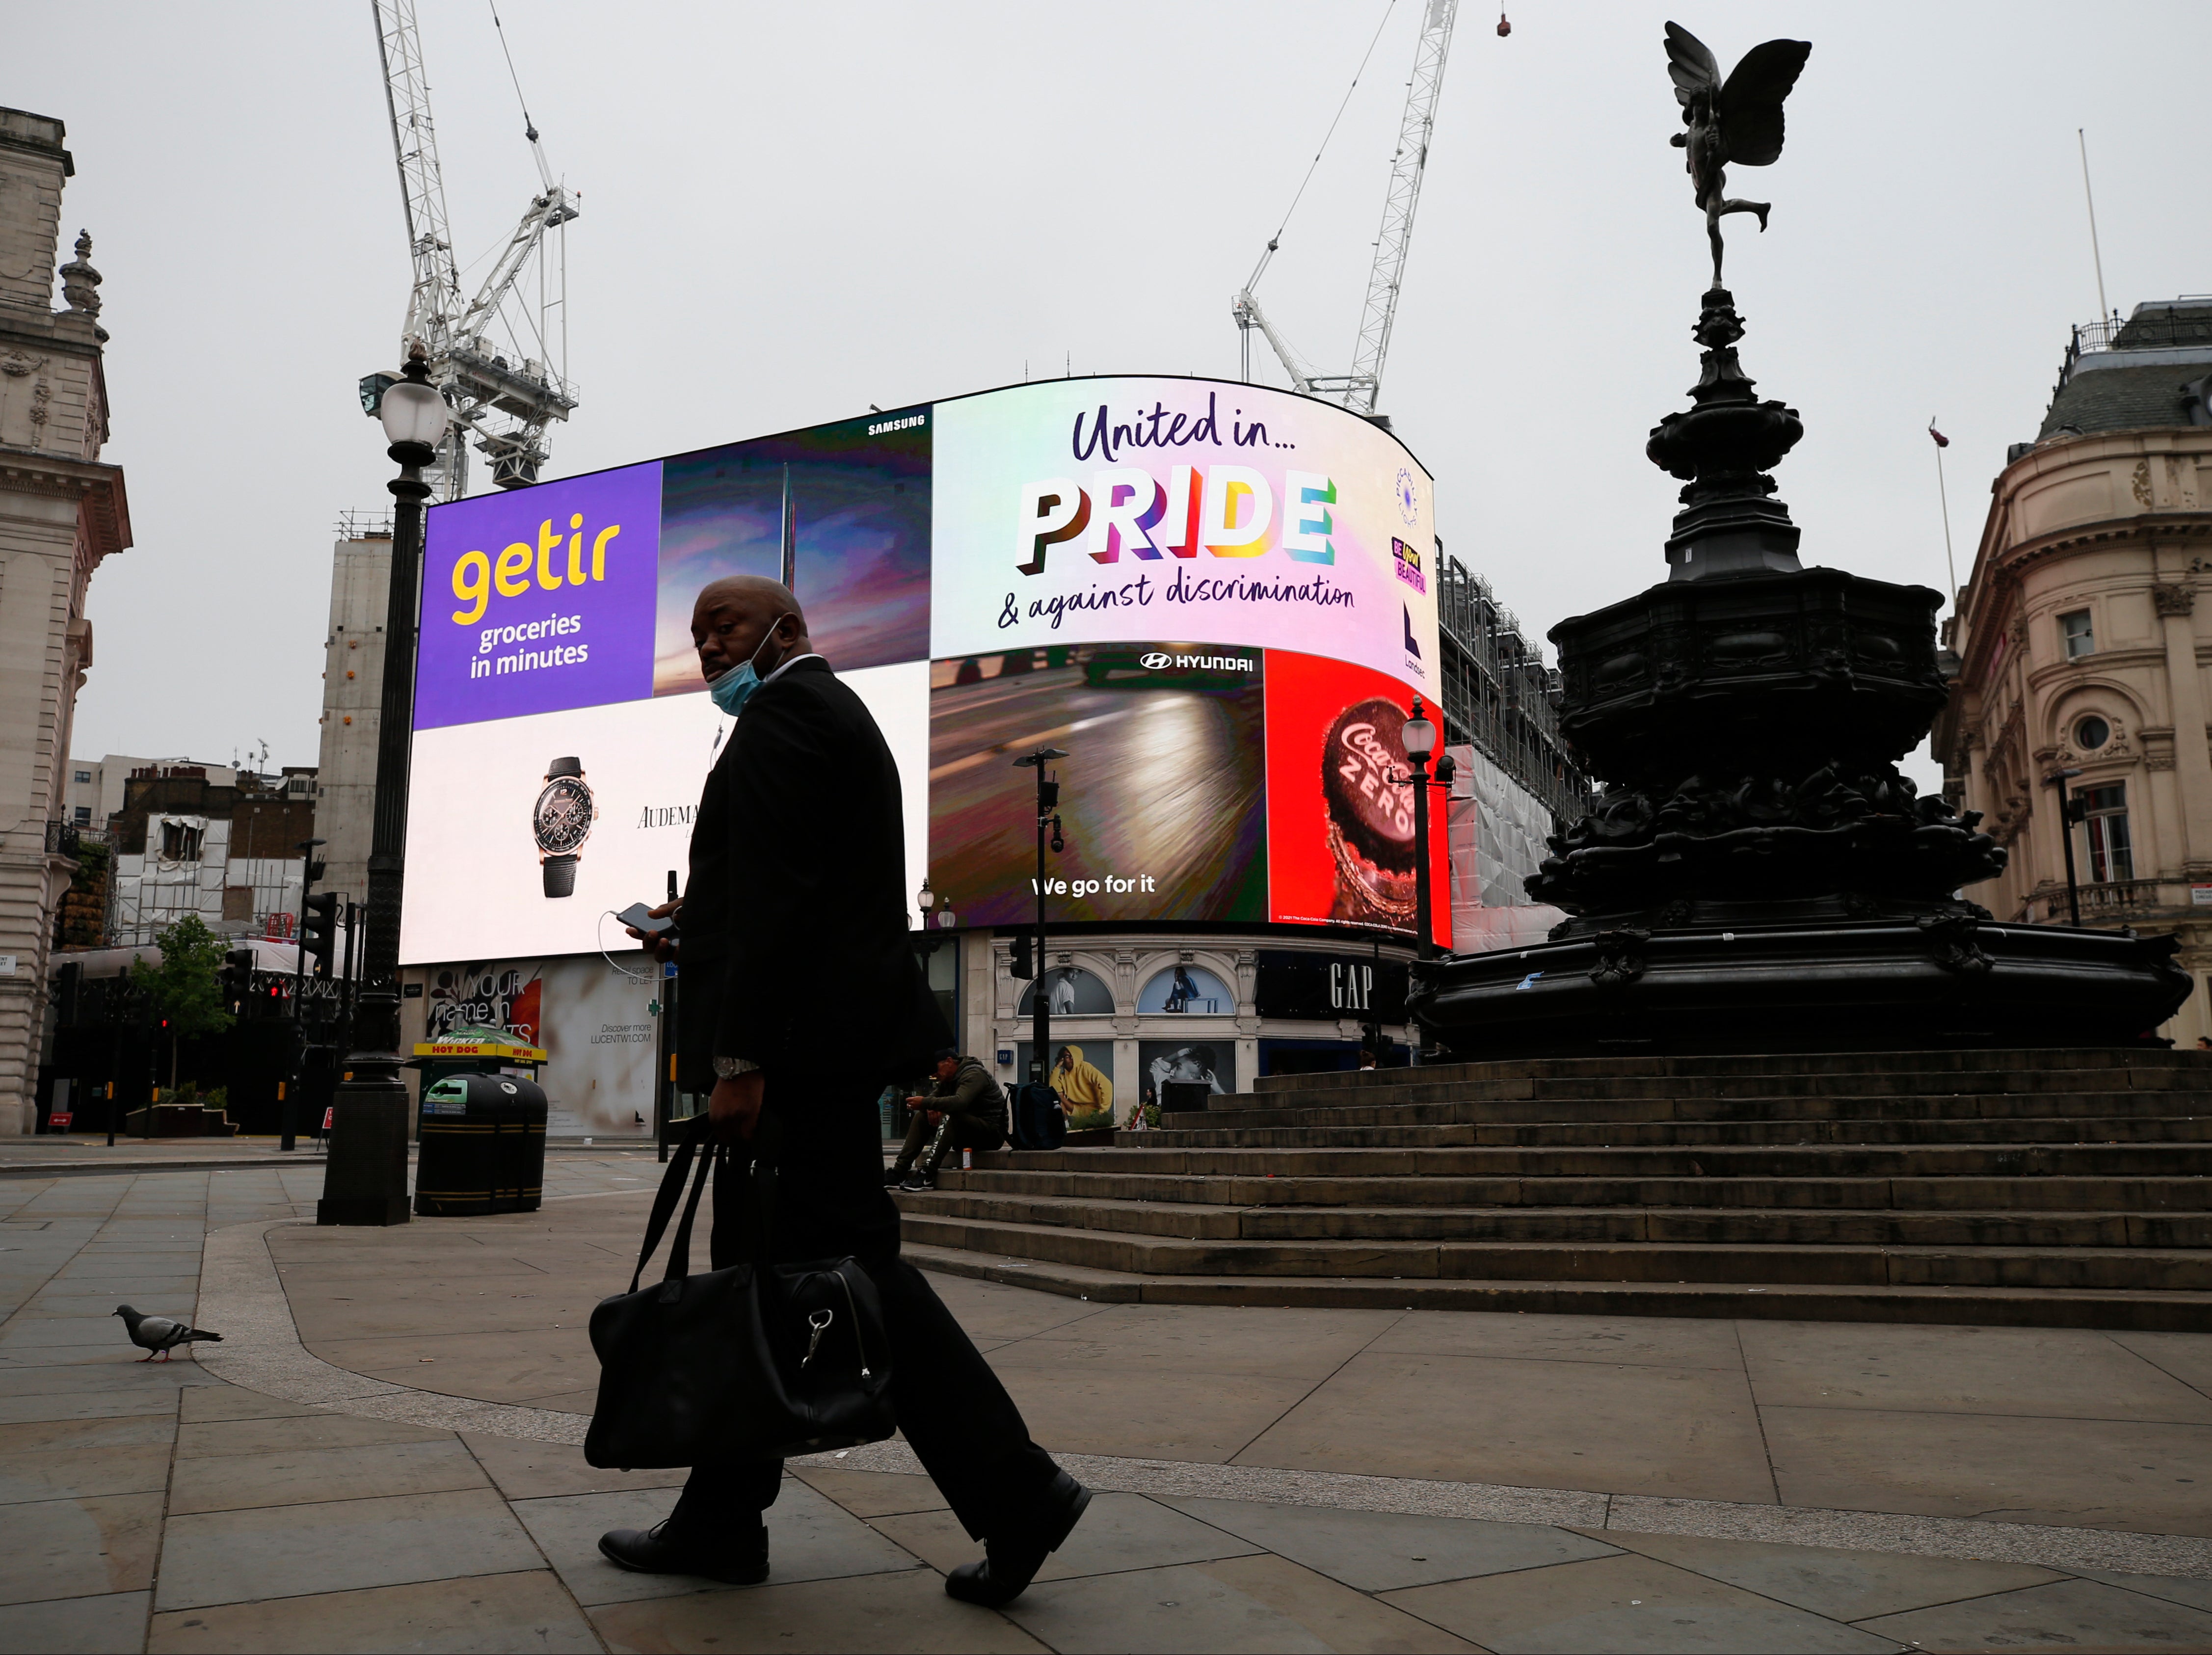 One man and his pigeon: an almost deserted Piccadilly Circus in central London on Sunday